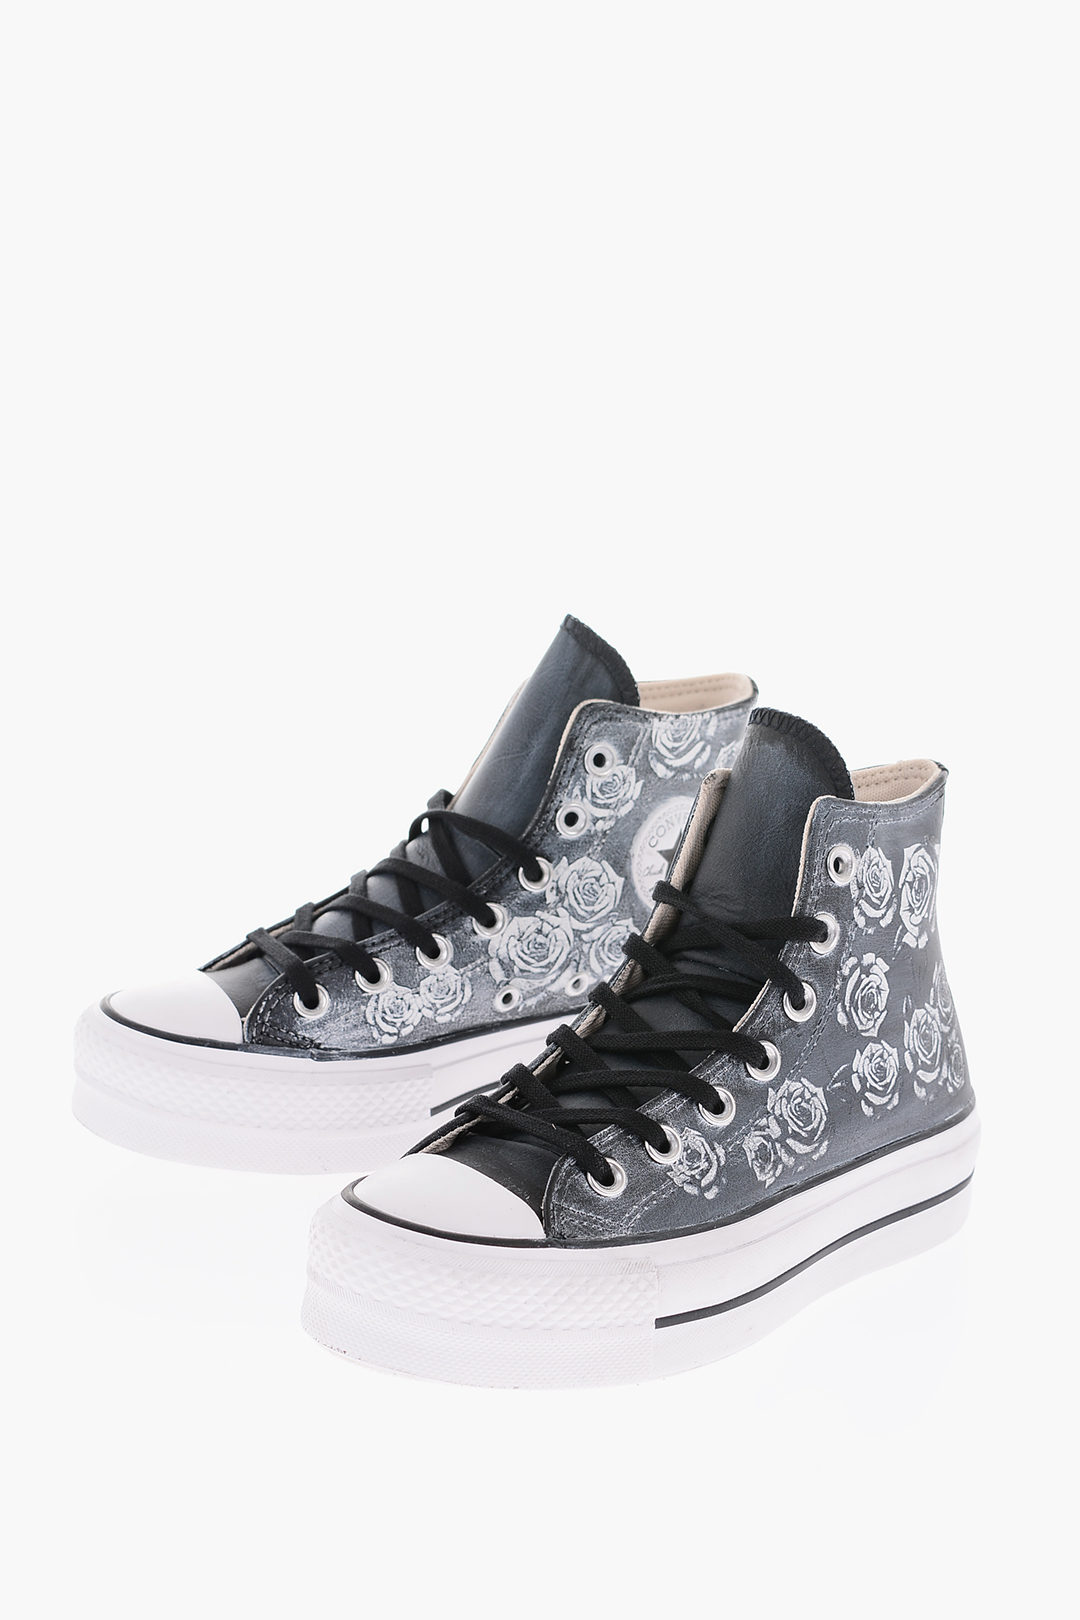 Share 249+ womens patterned sneakers latest